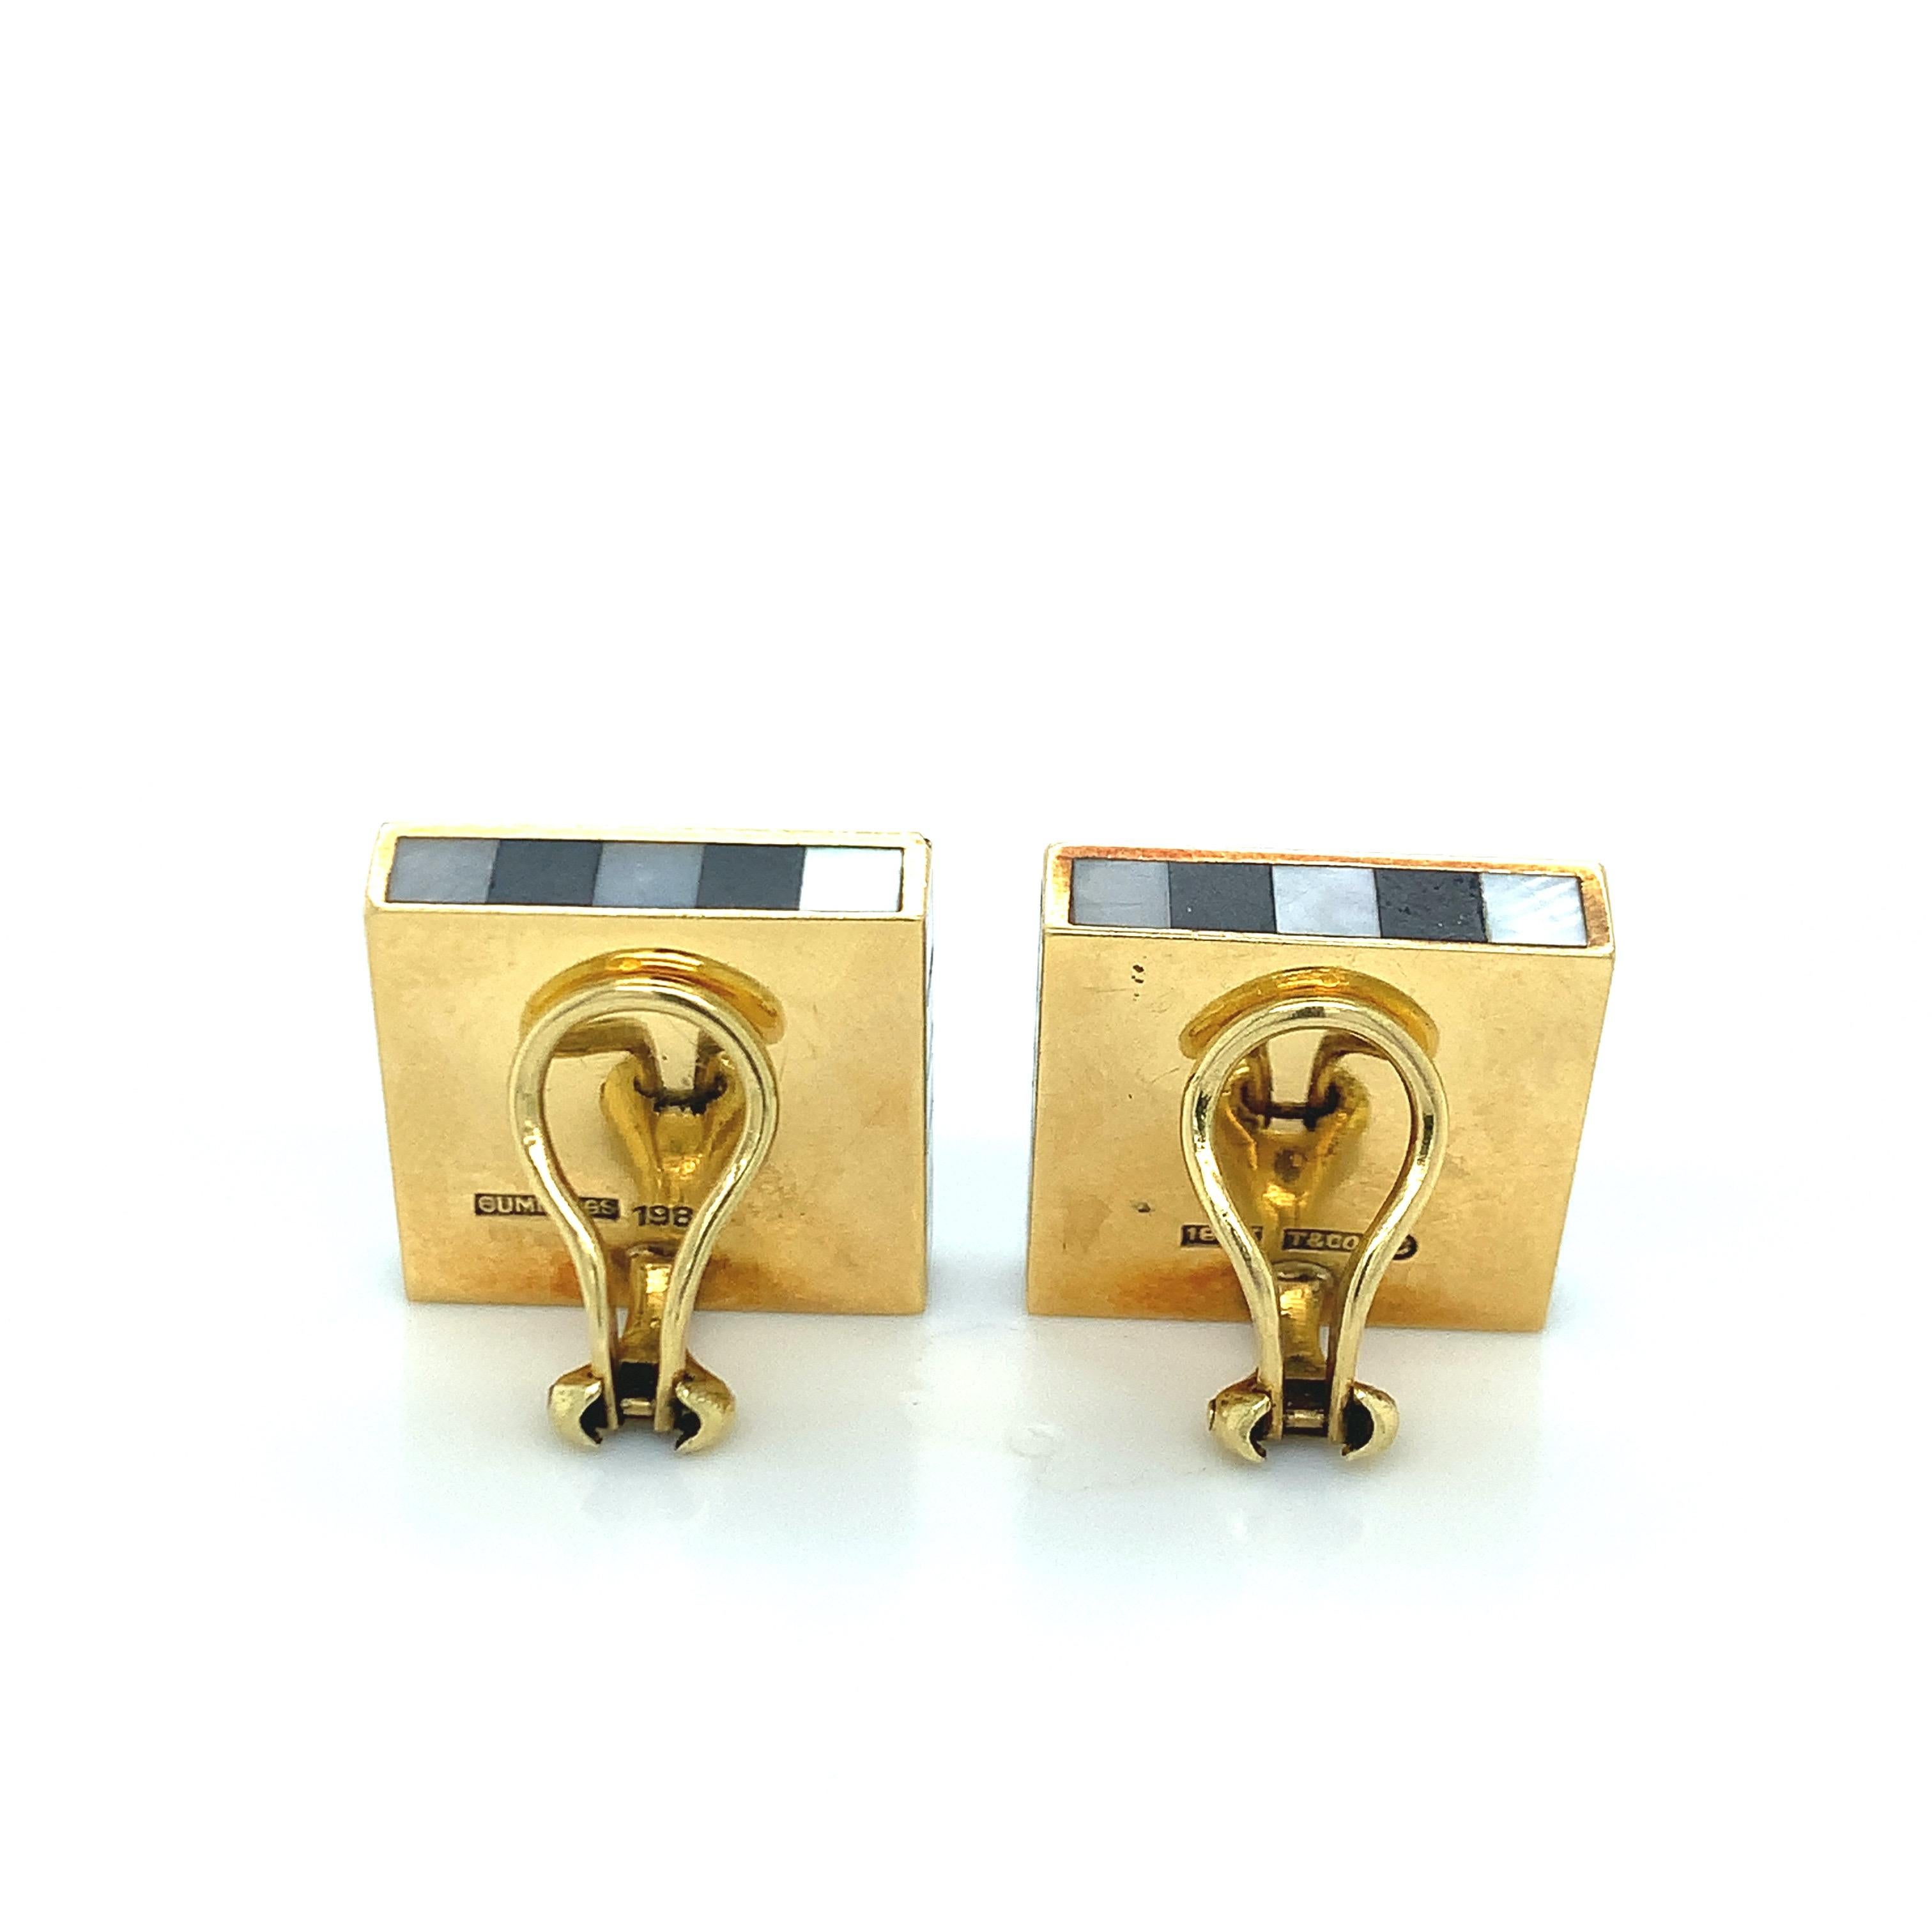 Pair of 18k gold earrings by Angela Cummings, set with inlayed checkered mother of pearl and black jade. Earrings are 0.75 x 0.75